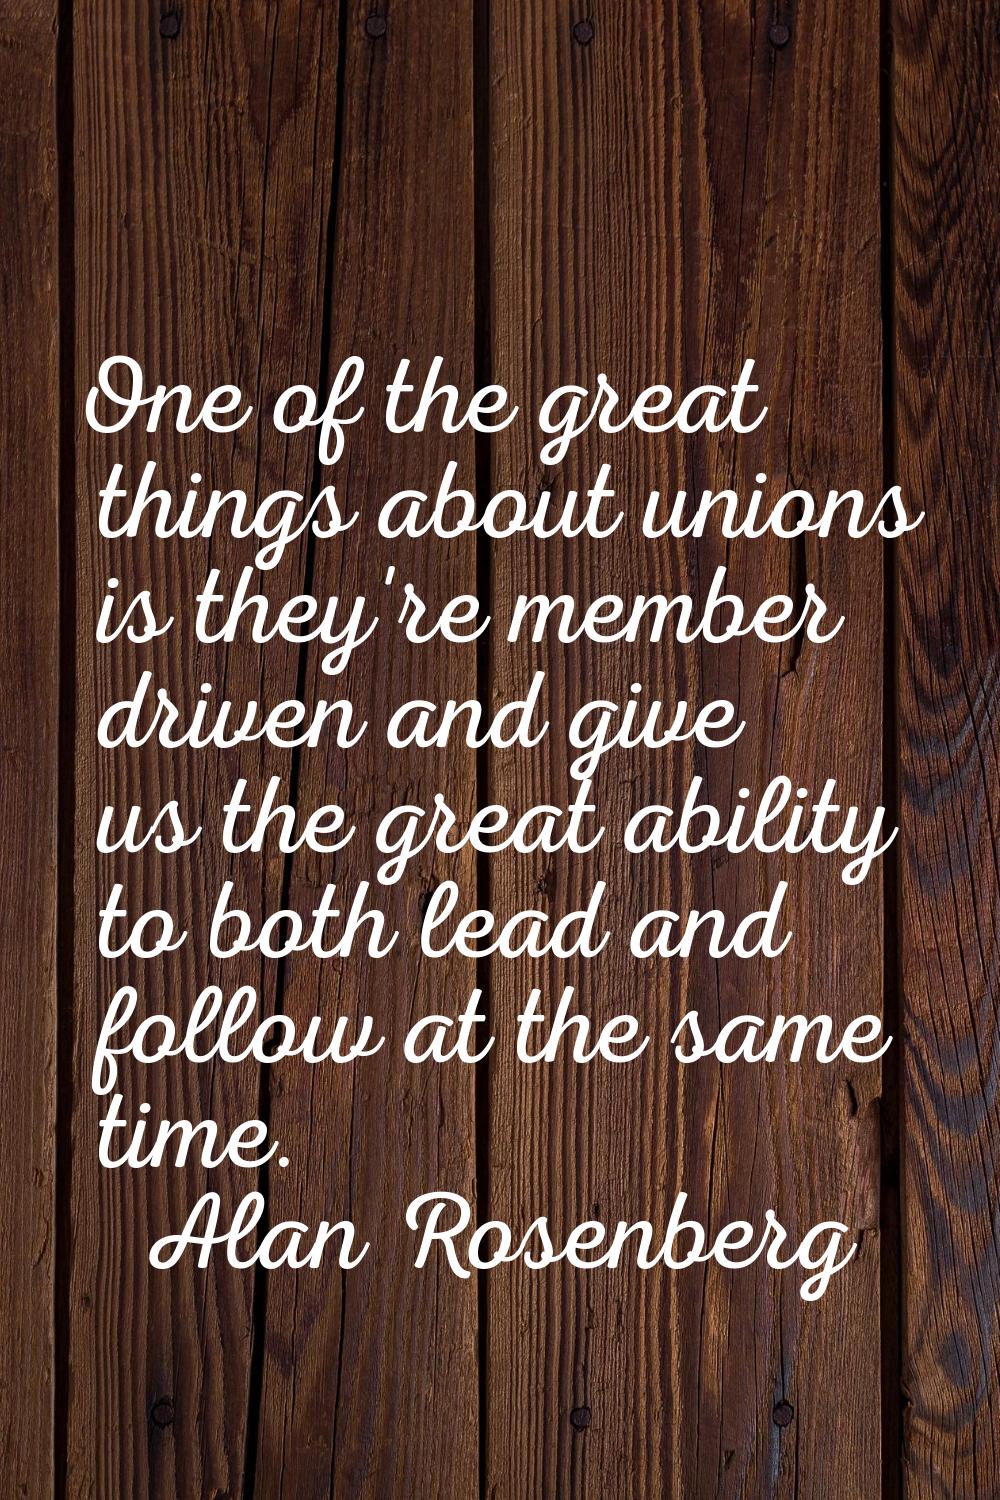 One of the great things about unions is they're member driven and give us the great ability to both